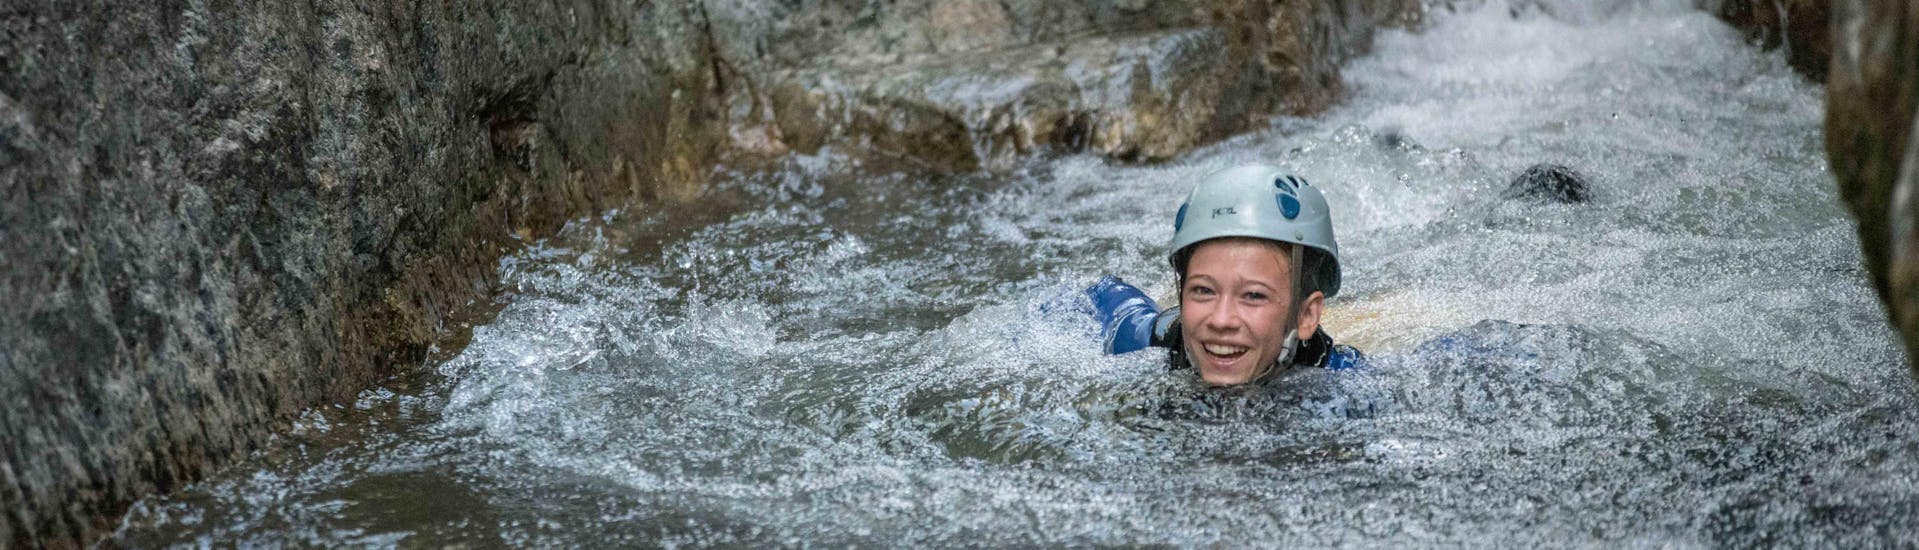 Discovery Canyoning in de Haute Besorgues Canyon in de Ardèche.